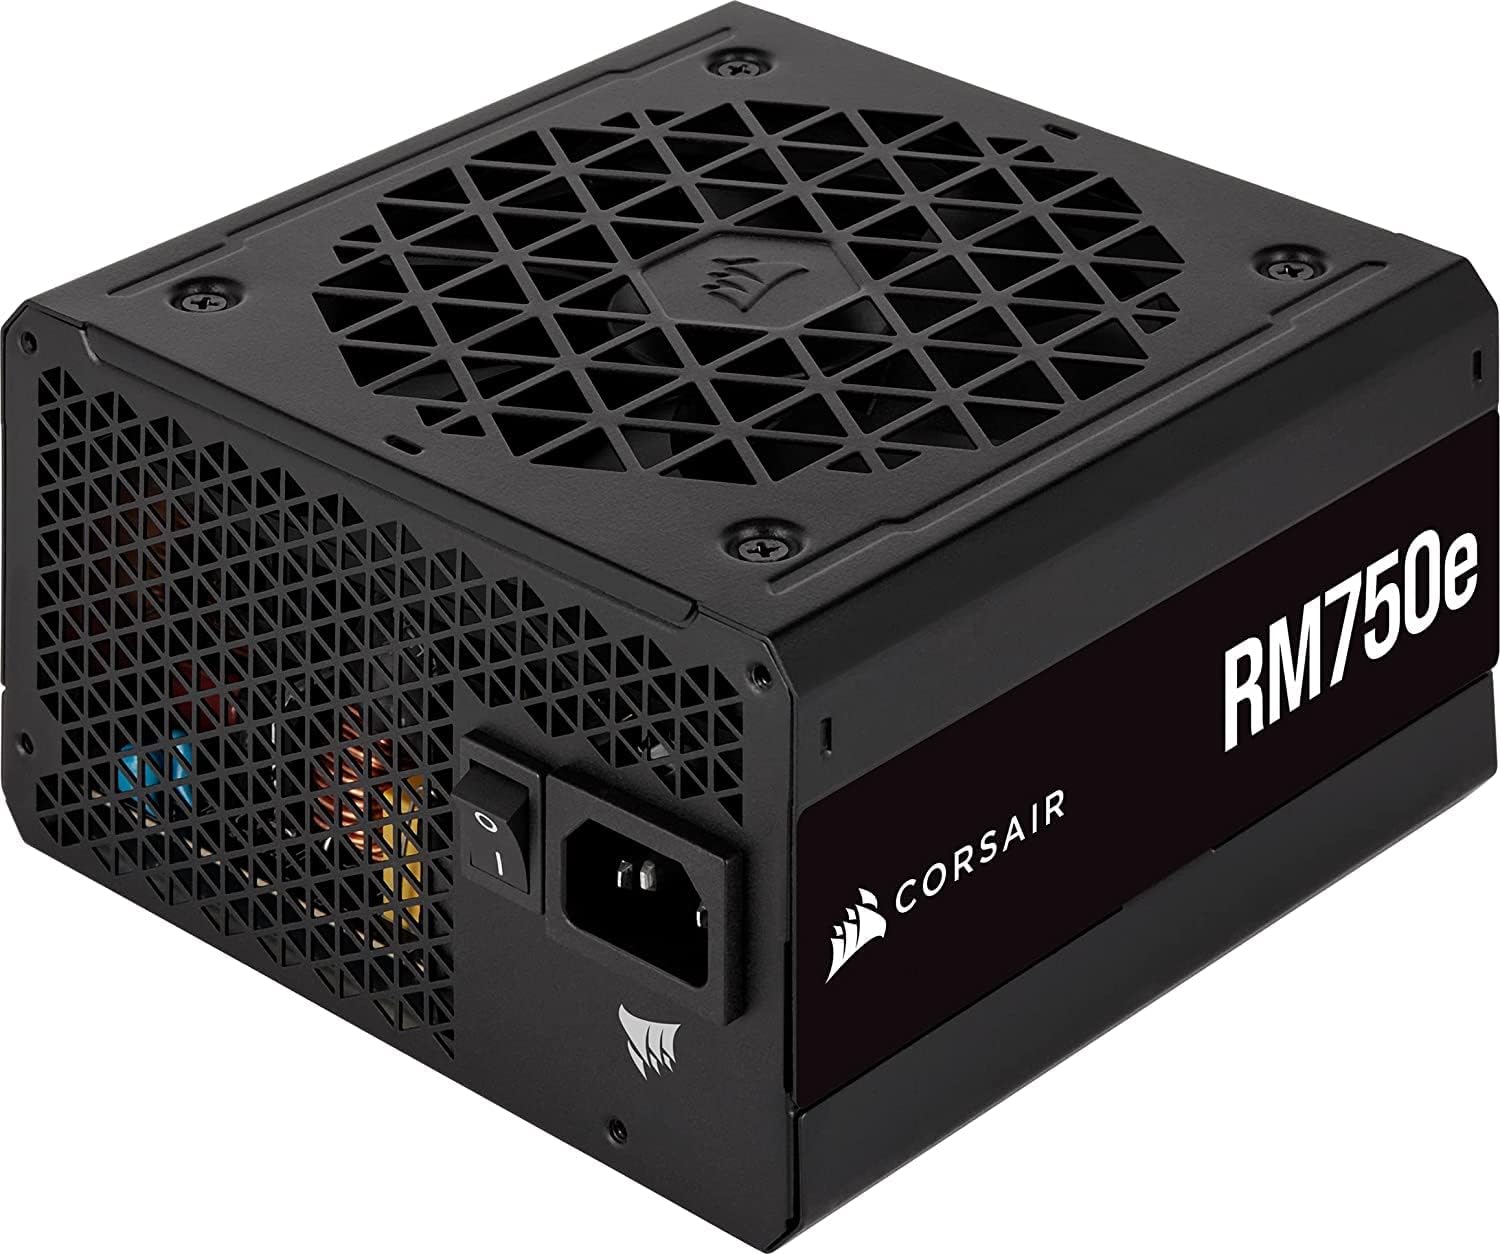 CORSAIR 750W 80+ Gold RM750e Fully Modular Low-Noise ATX Power Supply 80 Plus Gold Efficiency - Modern Standby Support, Black